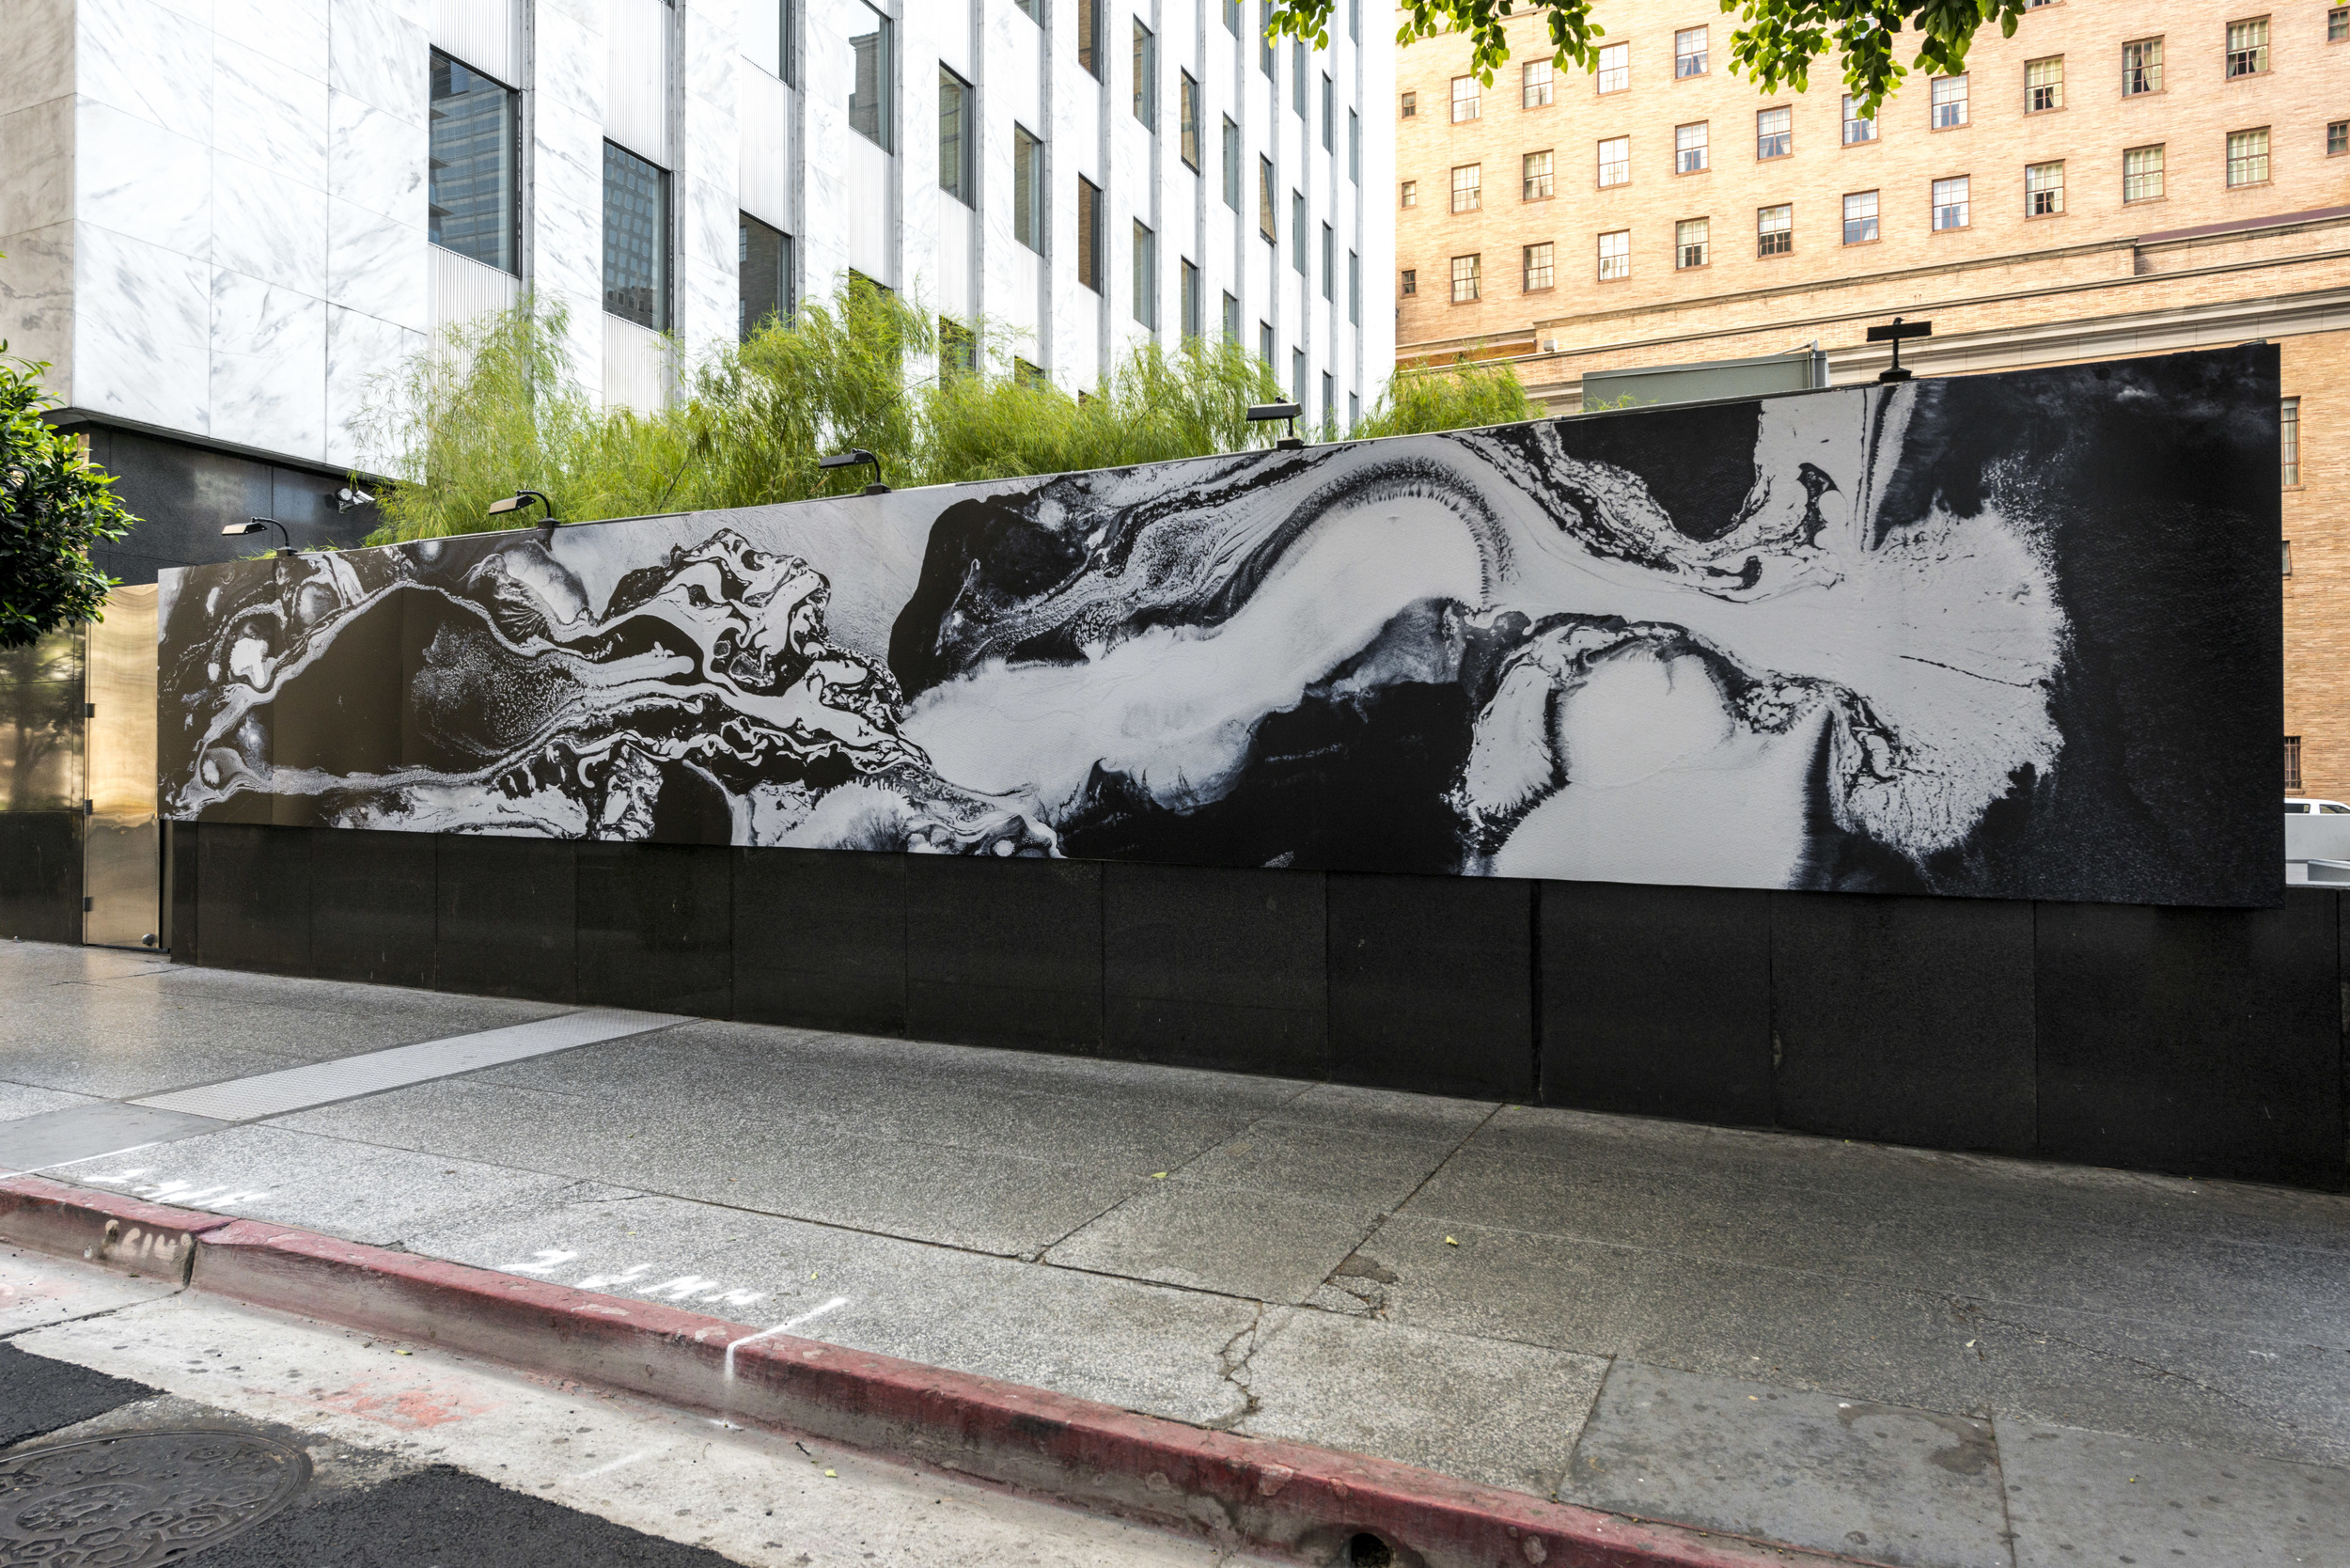   Dark Wave (Phase Transition),  Installation views, mural at the Standard Hotel, Los Angeles, 2013 photos by Joshua White 